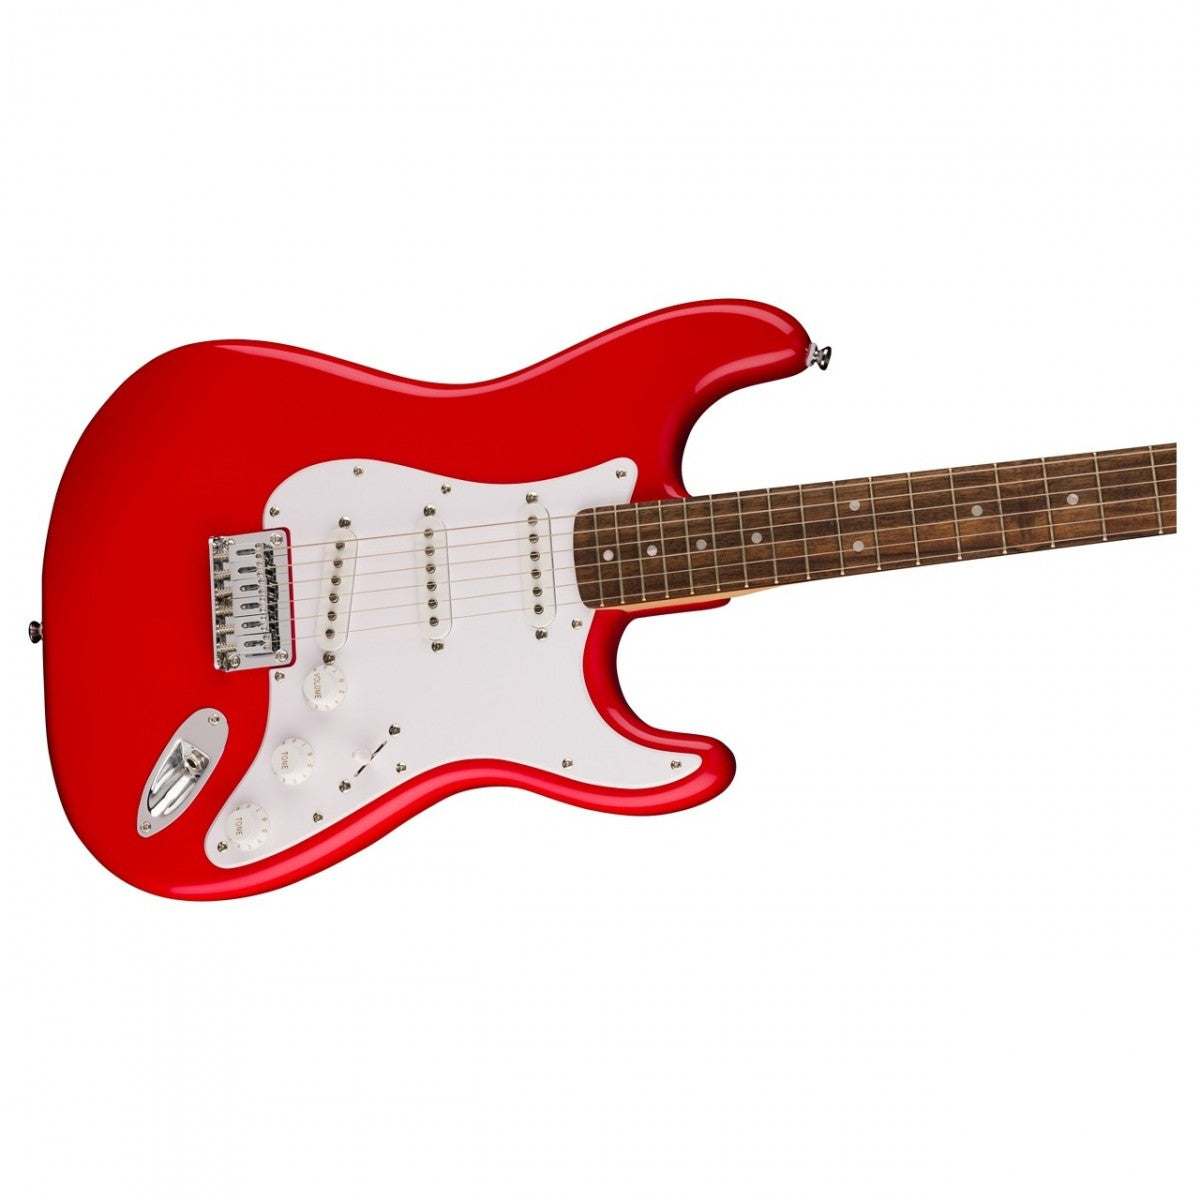 Squier Sonic Series Stratocaster HT Laurel Fingerboard, Torino Red - Việt Music